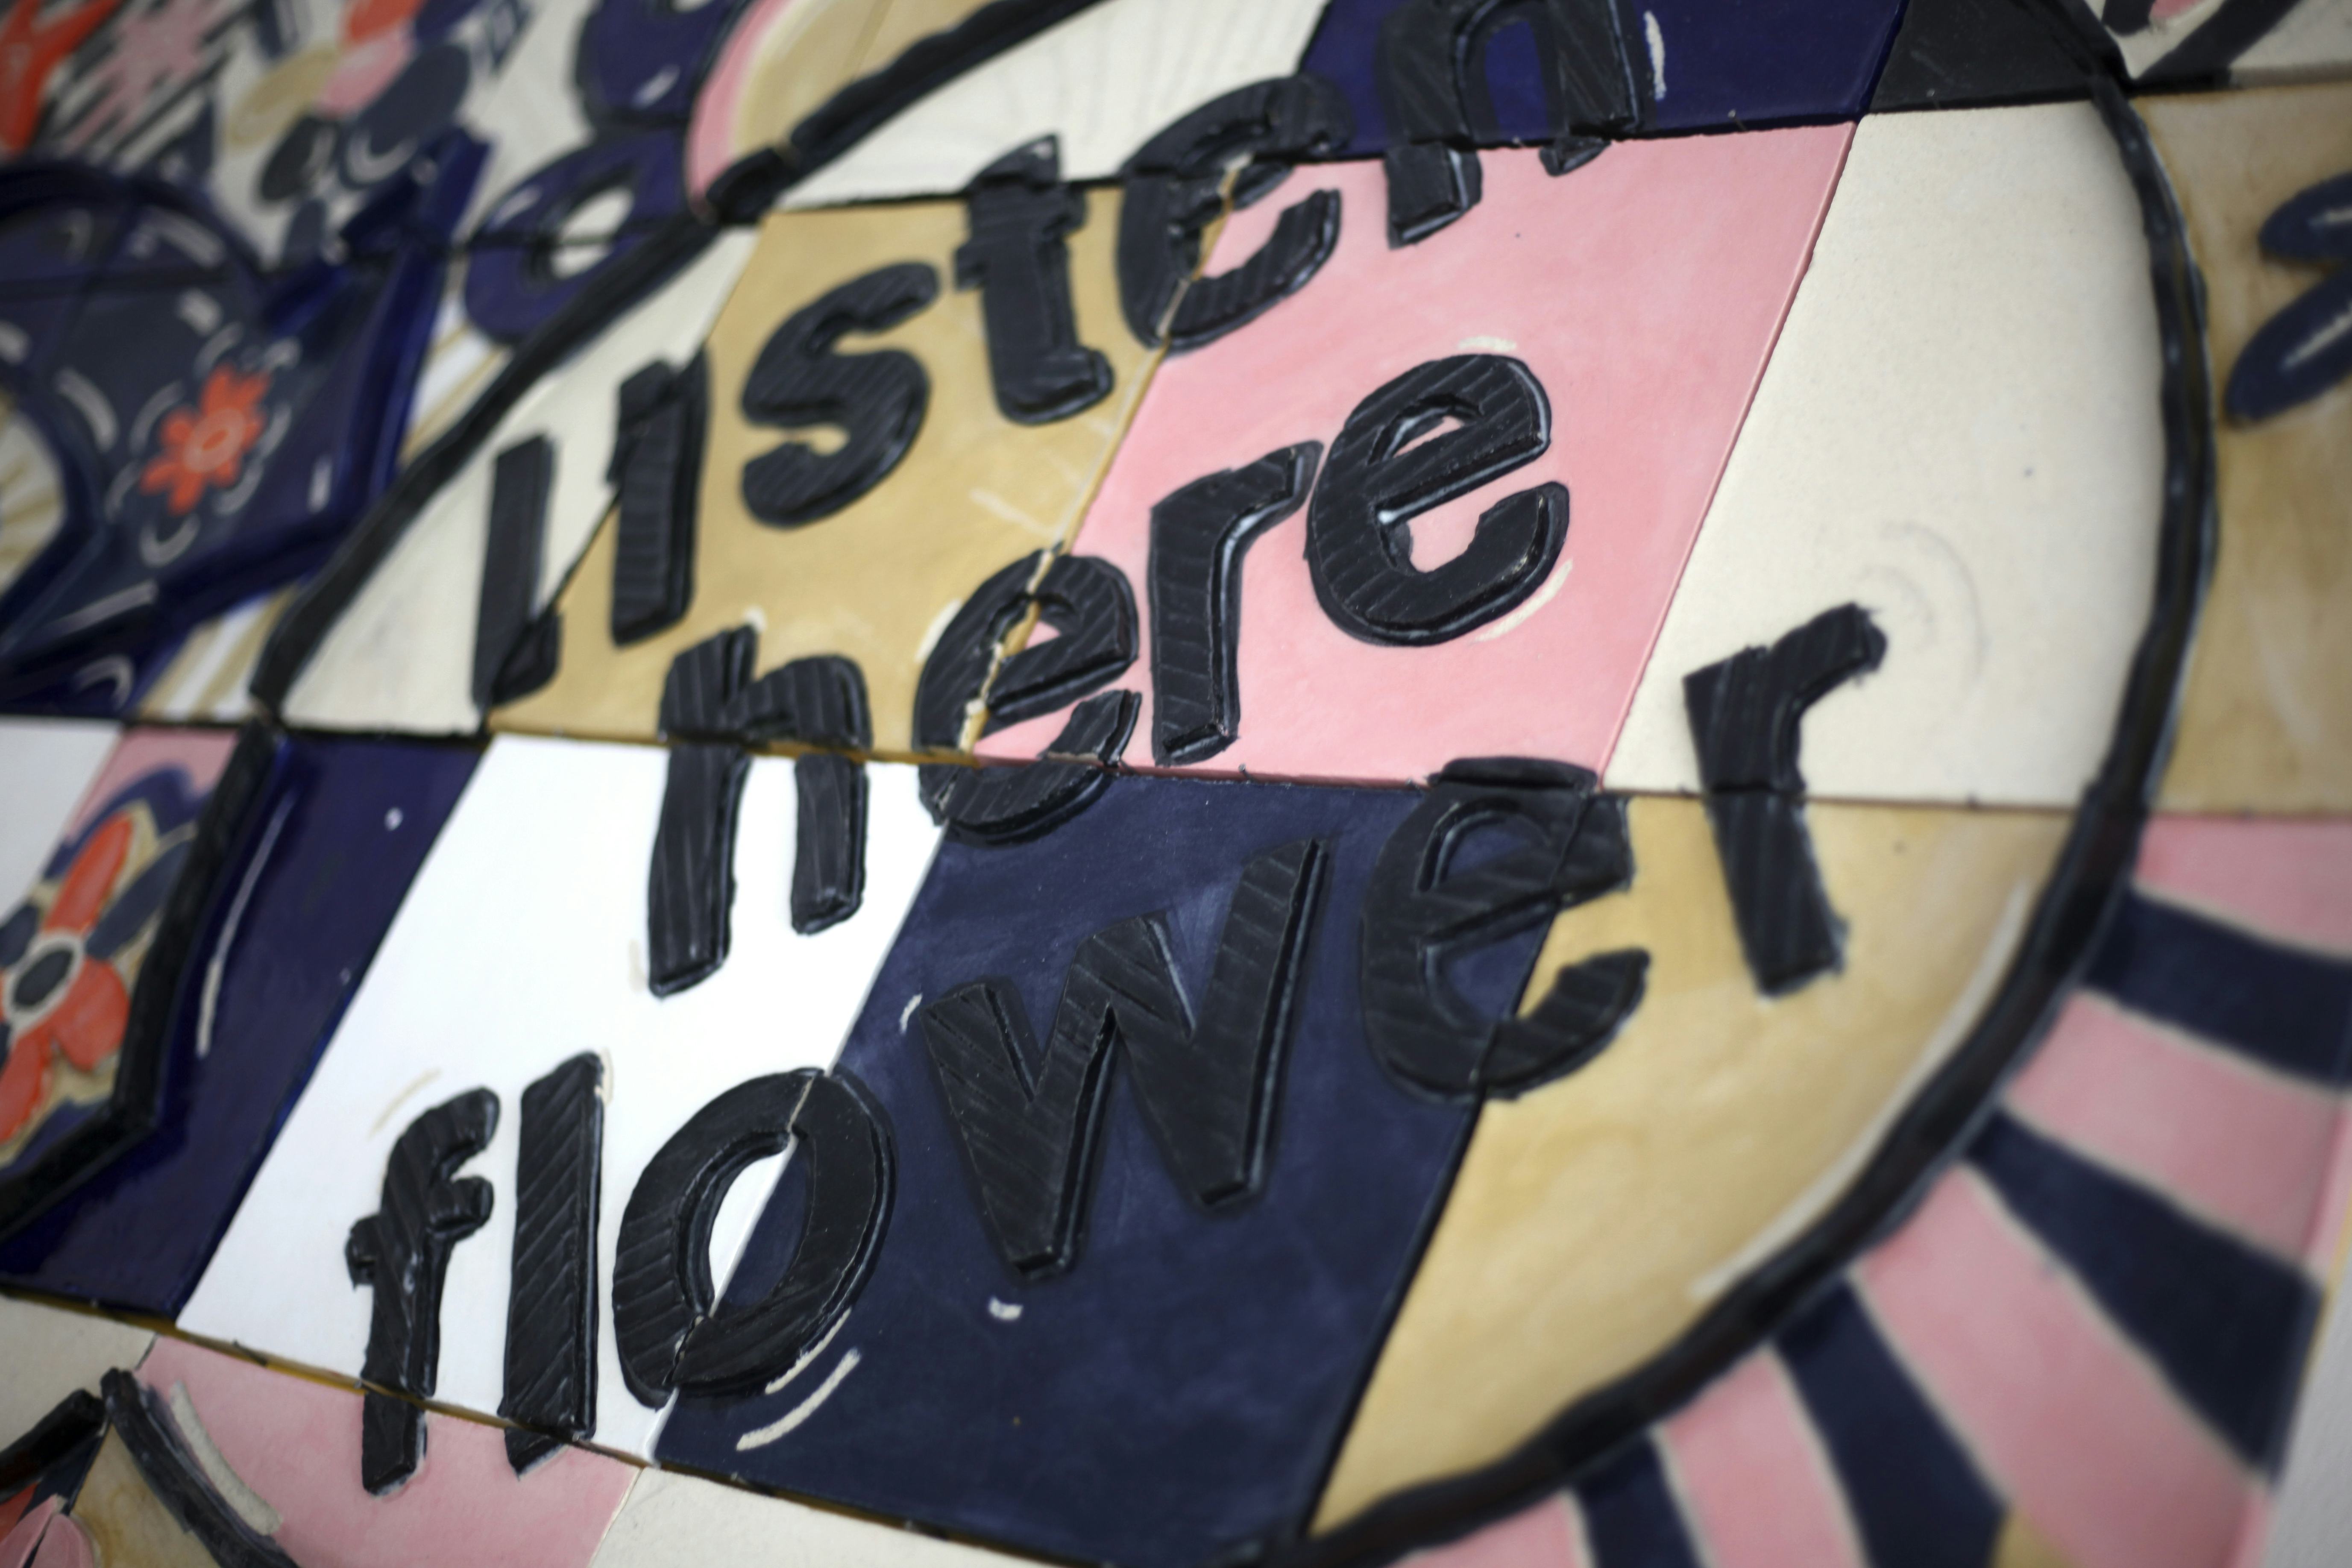 A detail of a colourful tiled mural with the words ‘listen here flower’